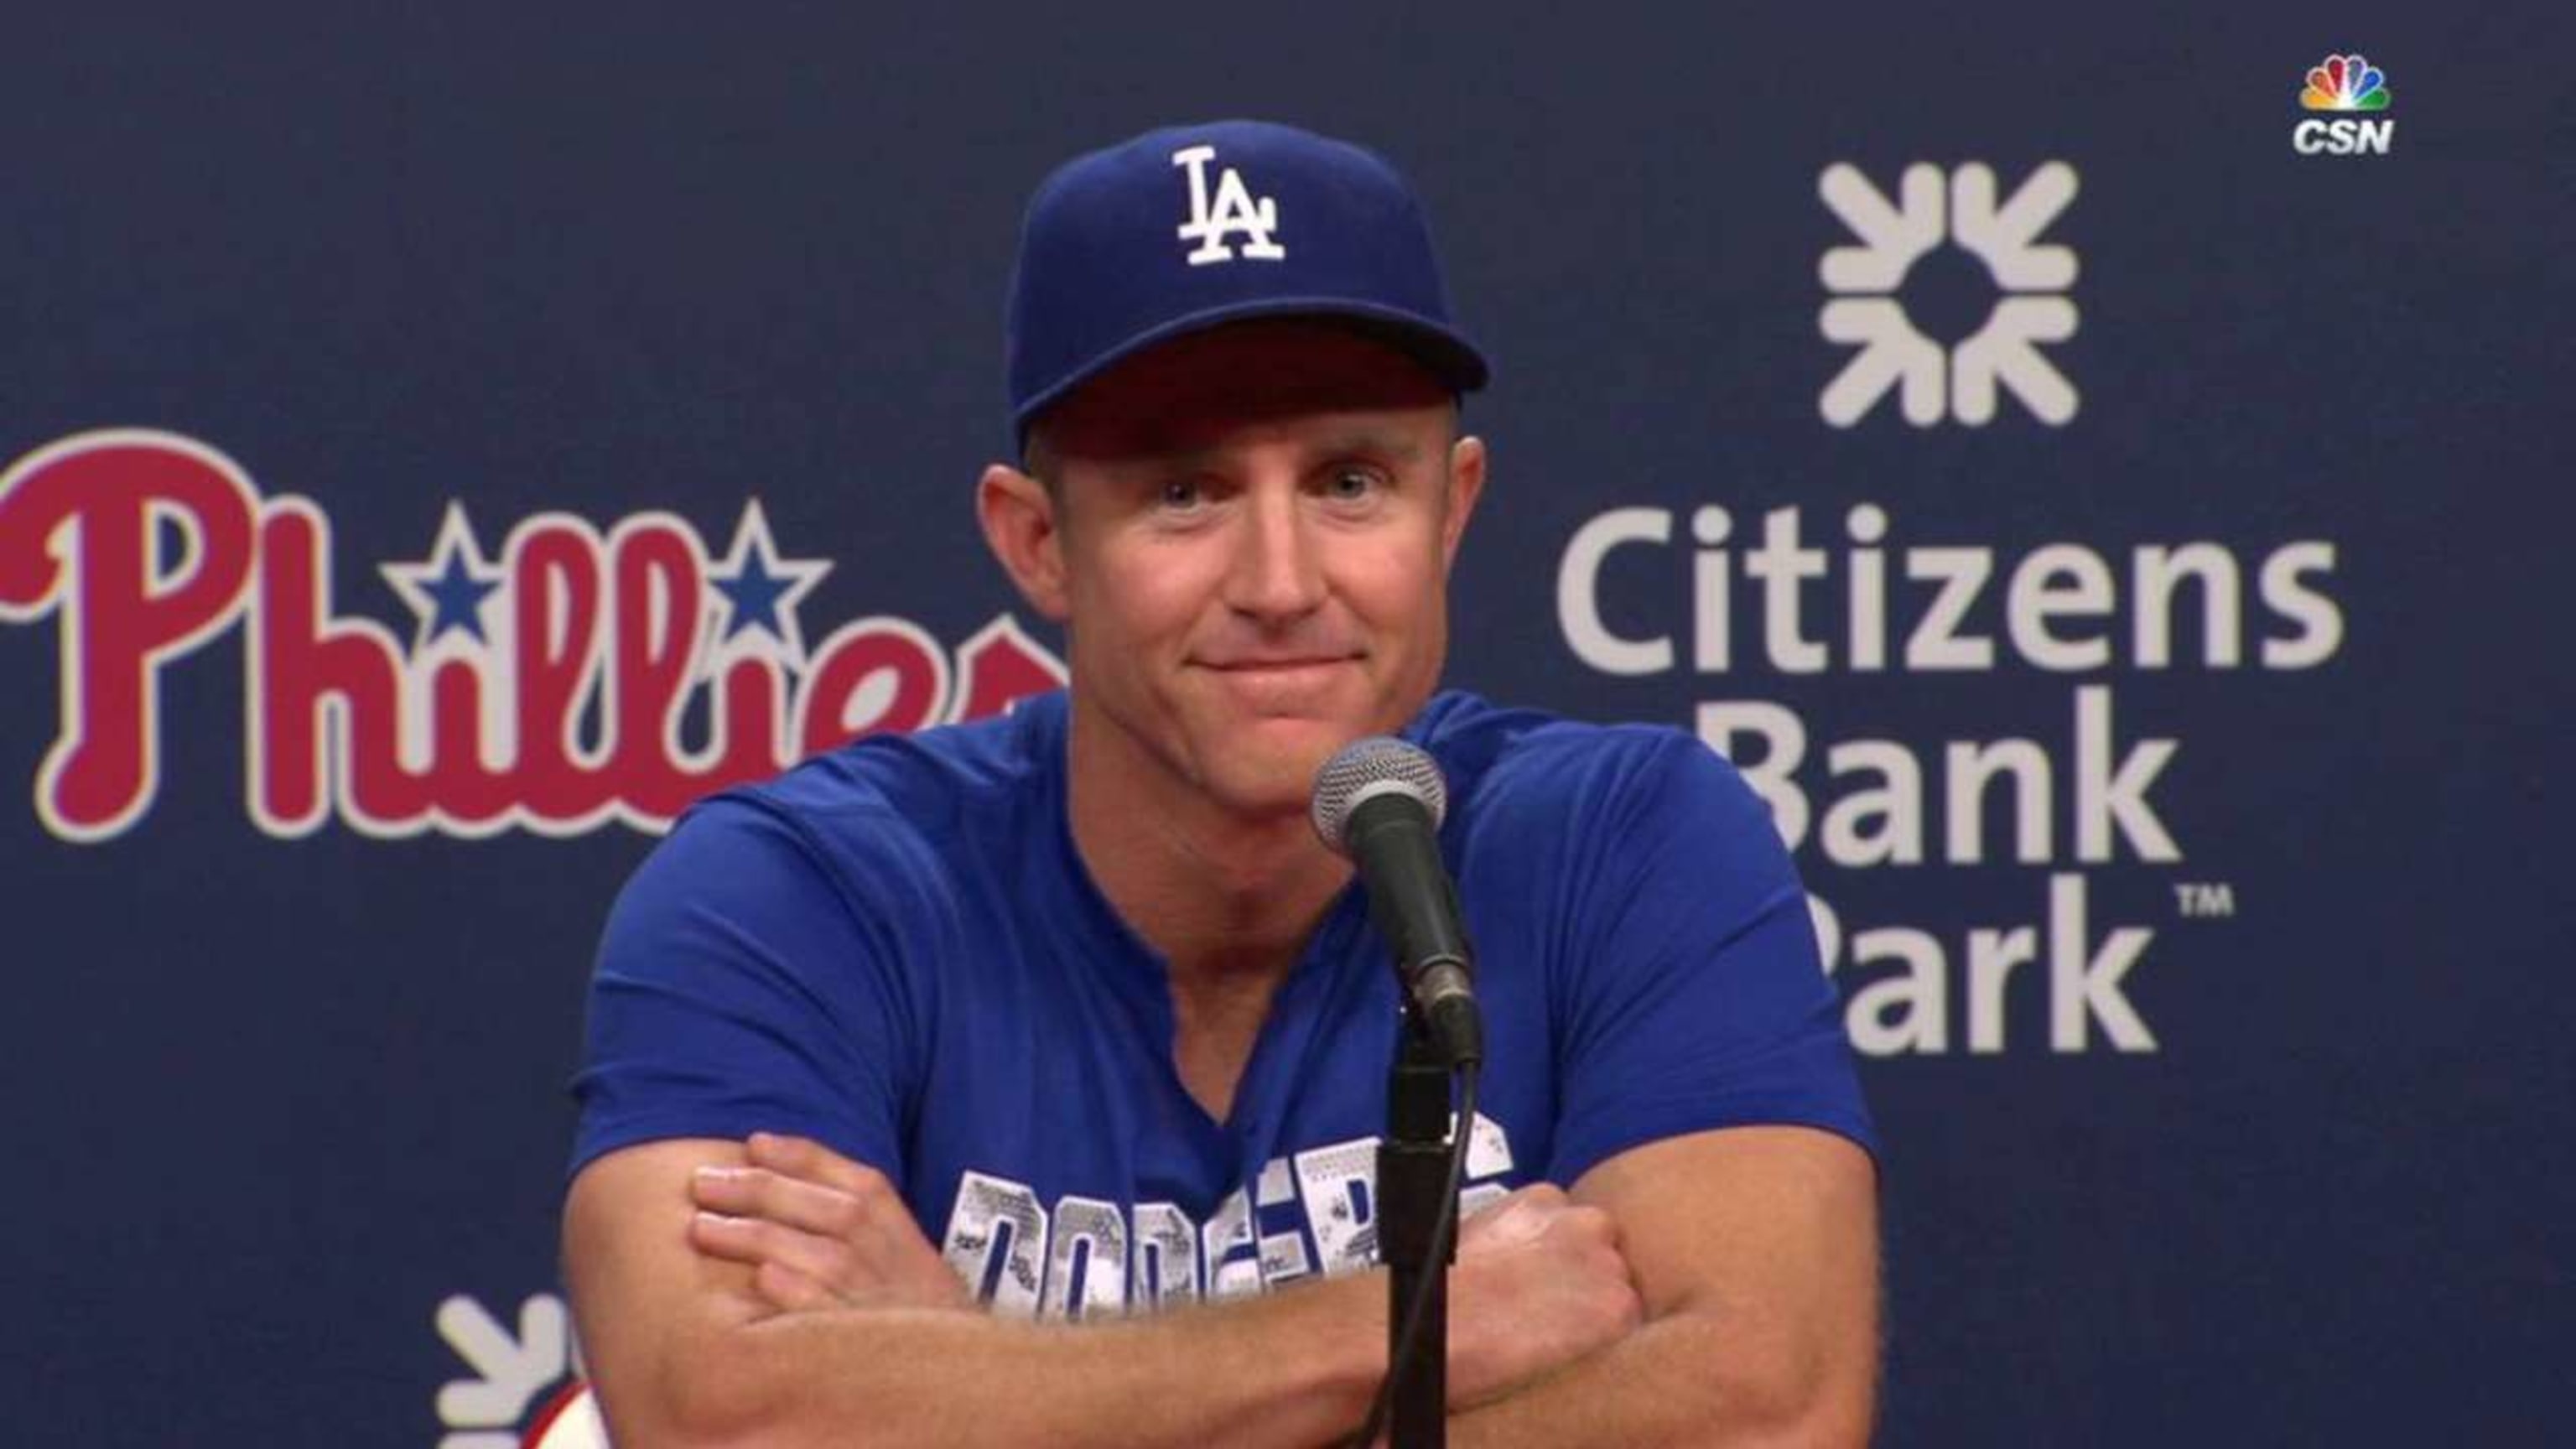 Chase Utley hits 2 HRs in return to Philly